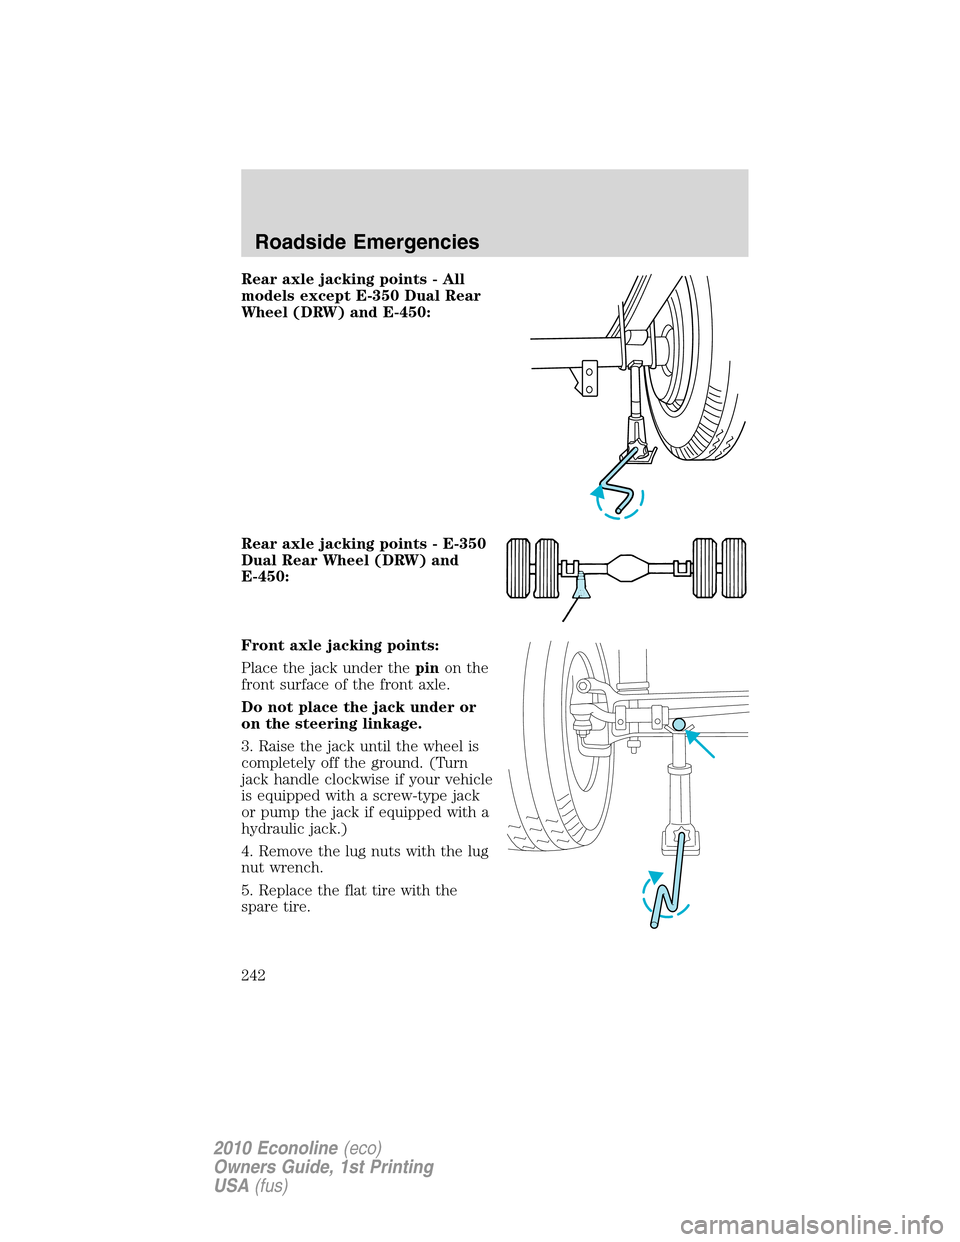 FORD E SERIES 2010 4.G Owners Manual Rear axle jacking points - All
models except E-350 Dual Rear
Wheel (DRW) and E-450:
Rear axle jacking points - E-350
Dual Rear Wheel (DRW) and
E-450:
Front axle jacking points:
Place the jack under th